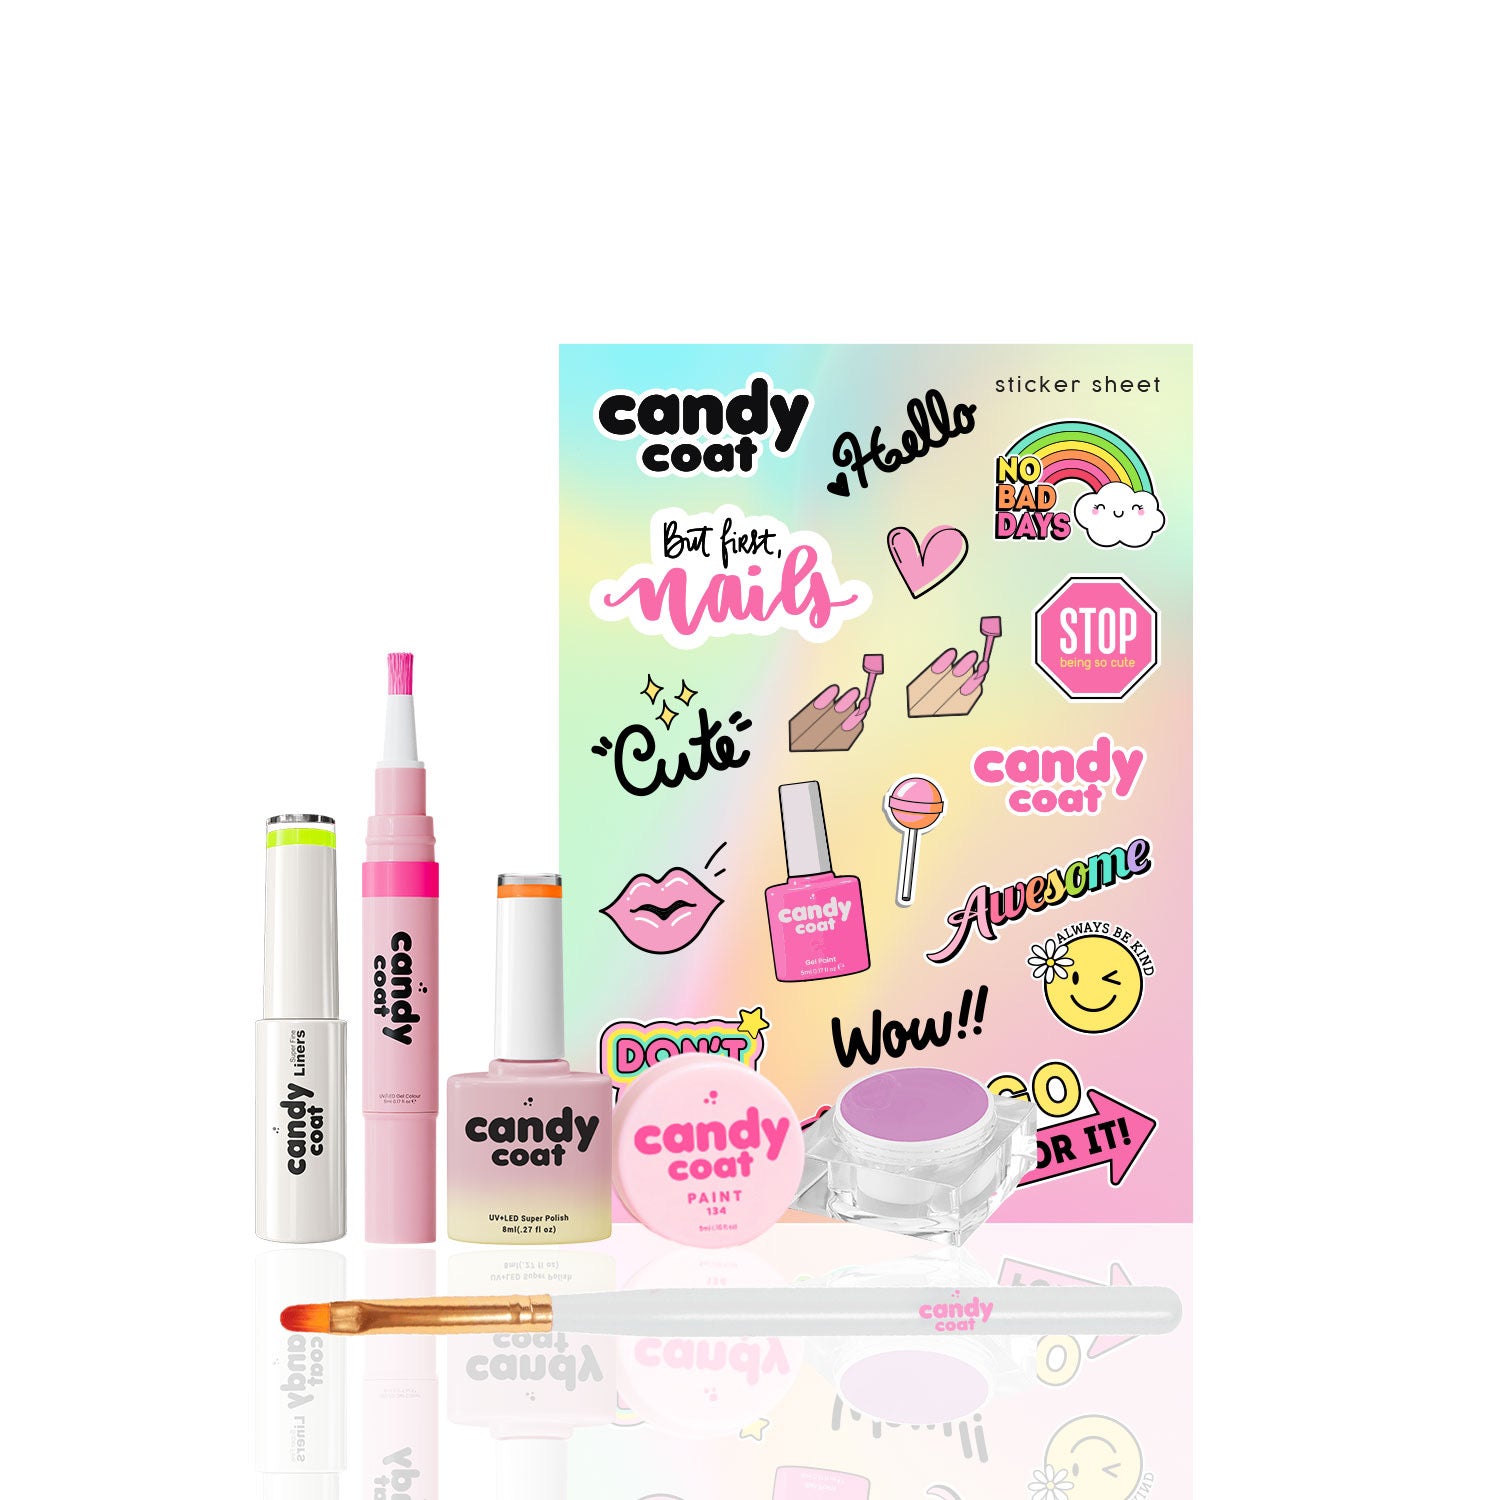 Candy Coat - Discovery Box - Candy Coat